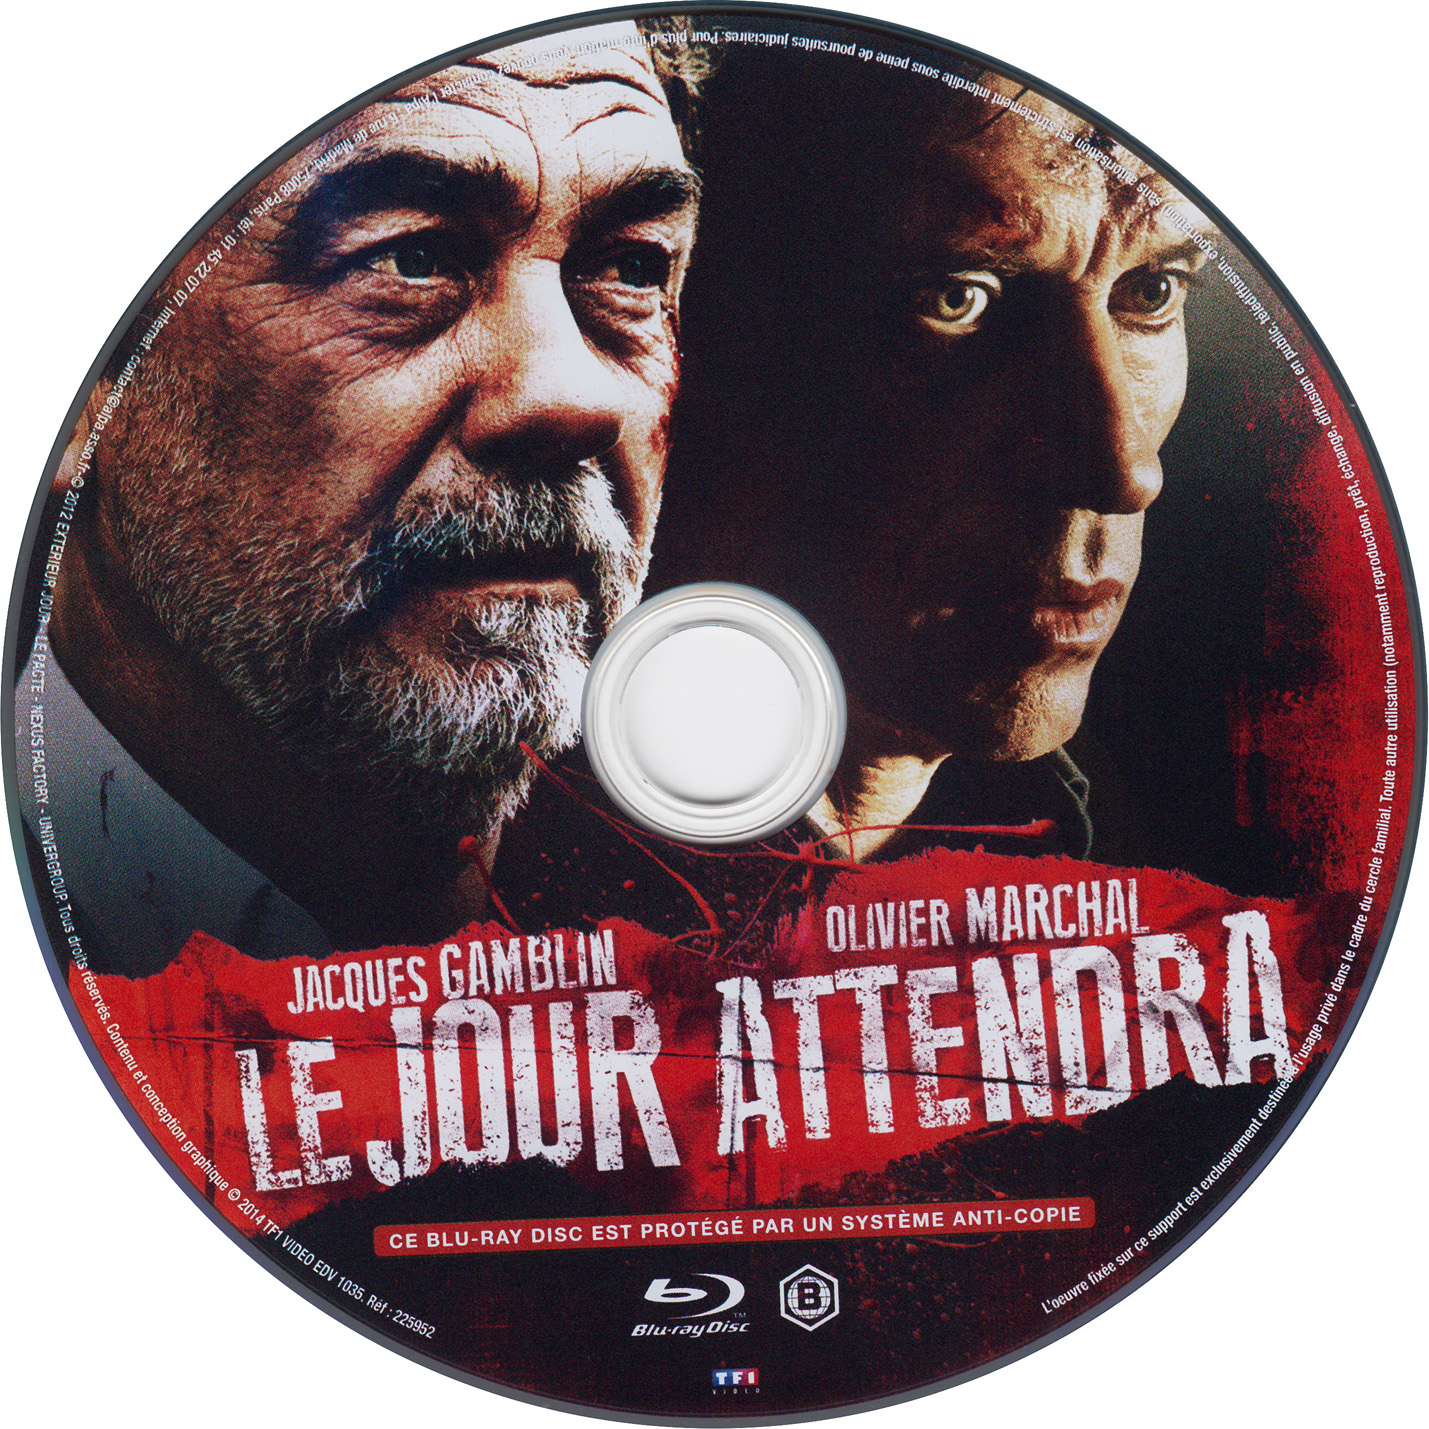 Le jour attendra (BLU-RAY)